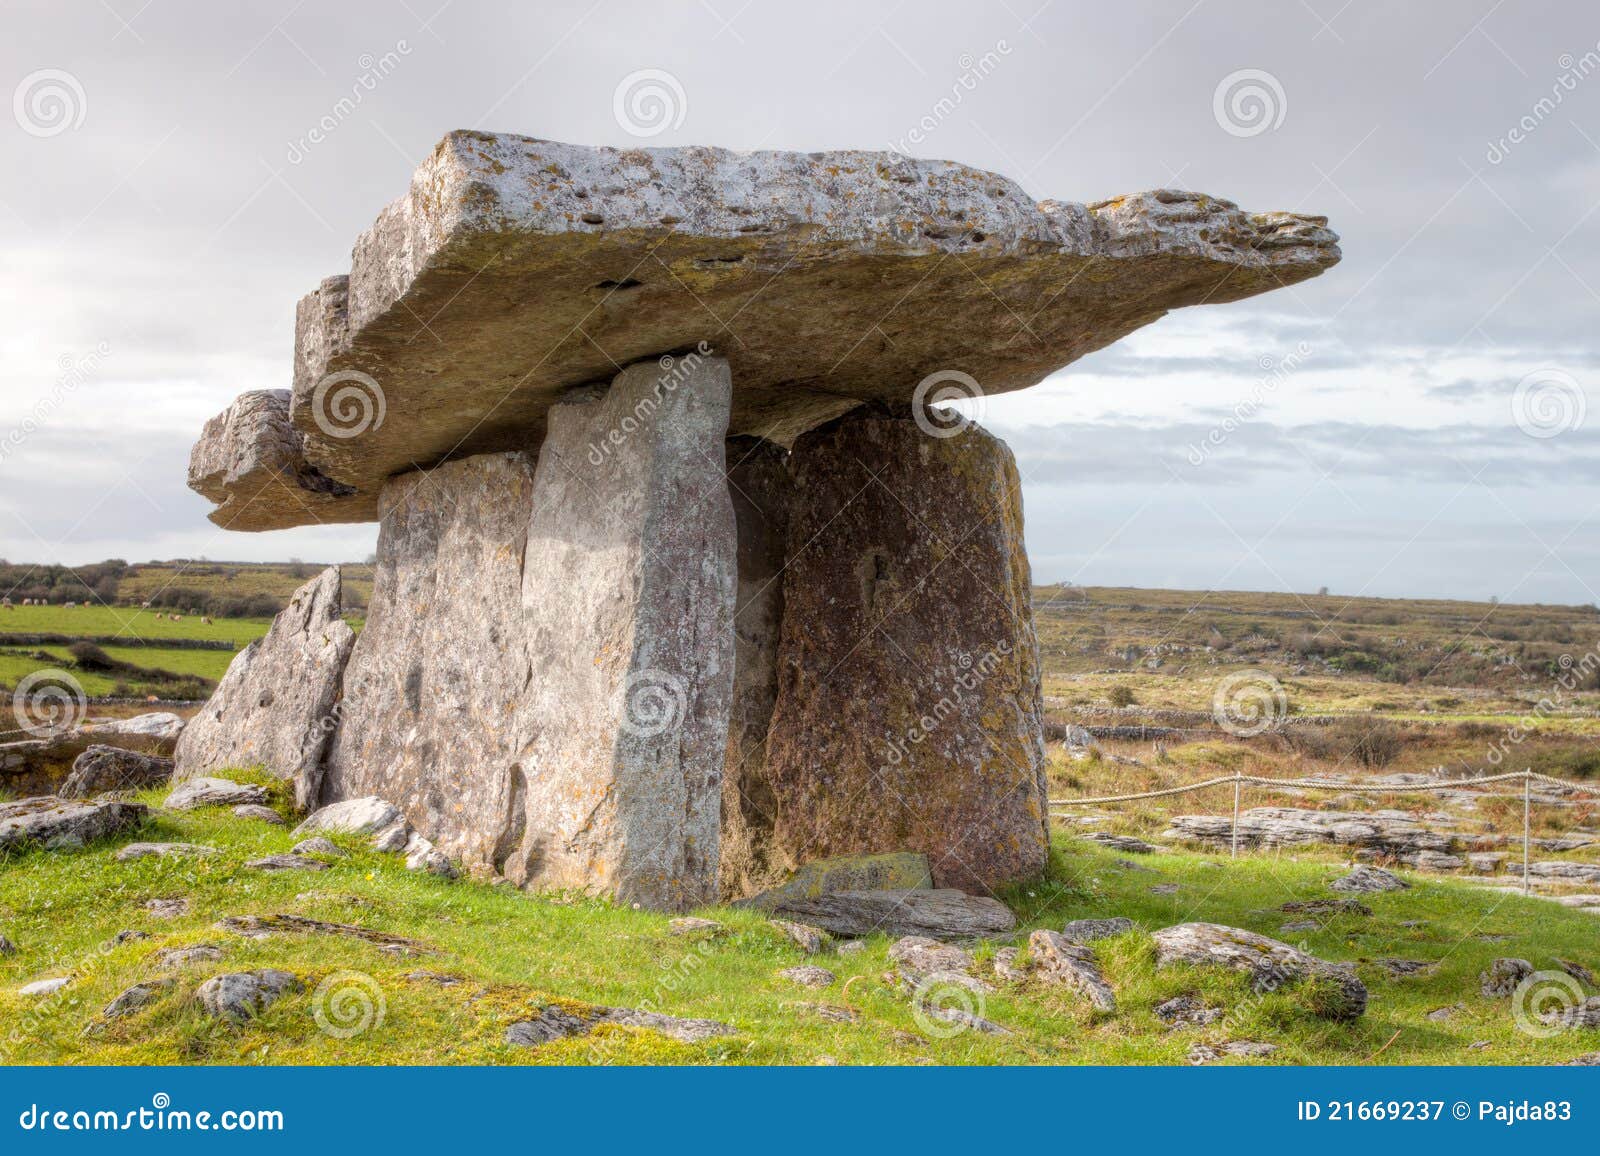 poulnabrone portal tomb in ireland.